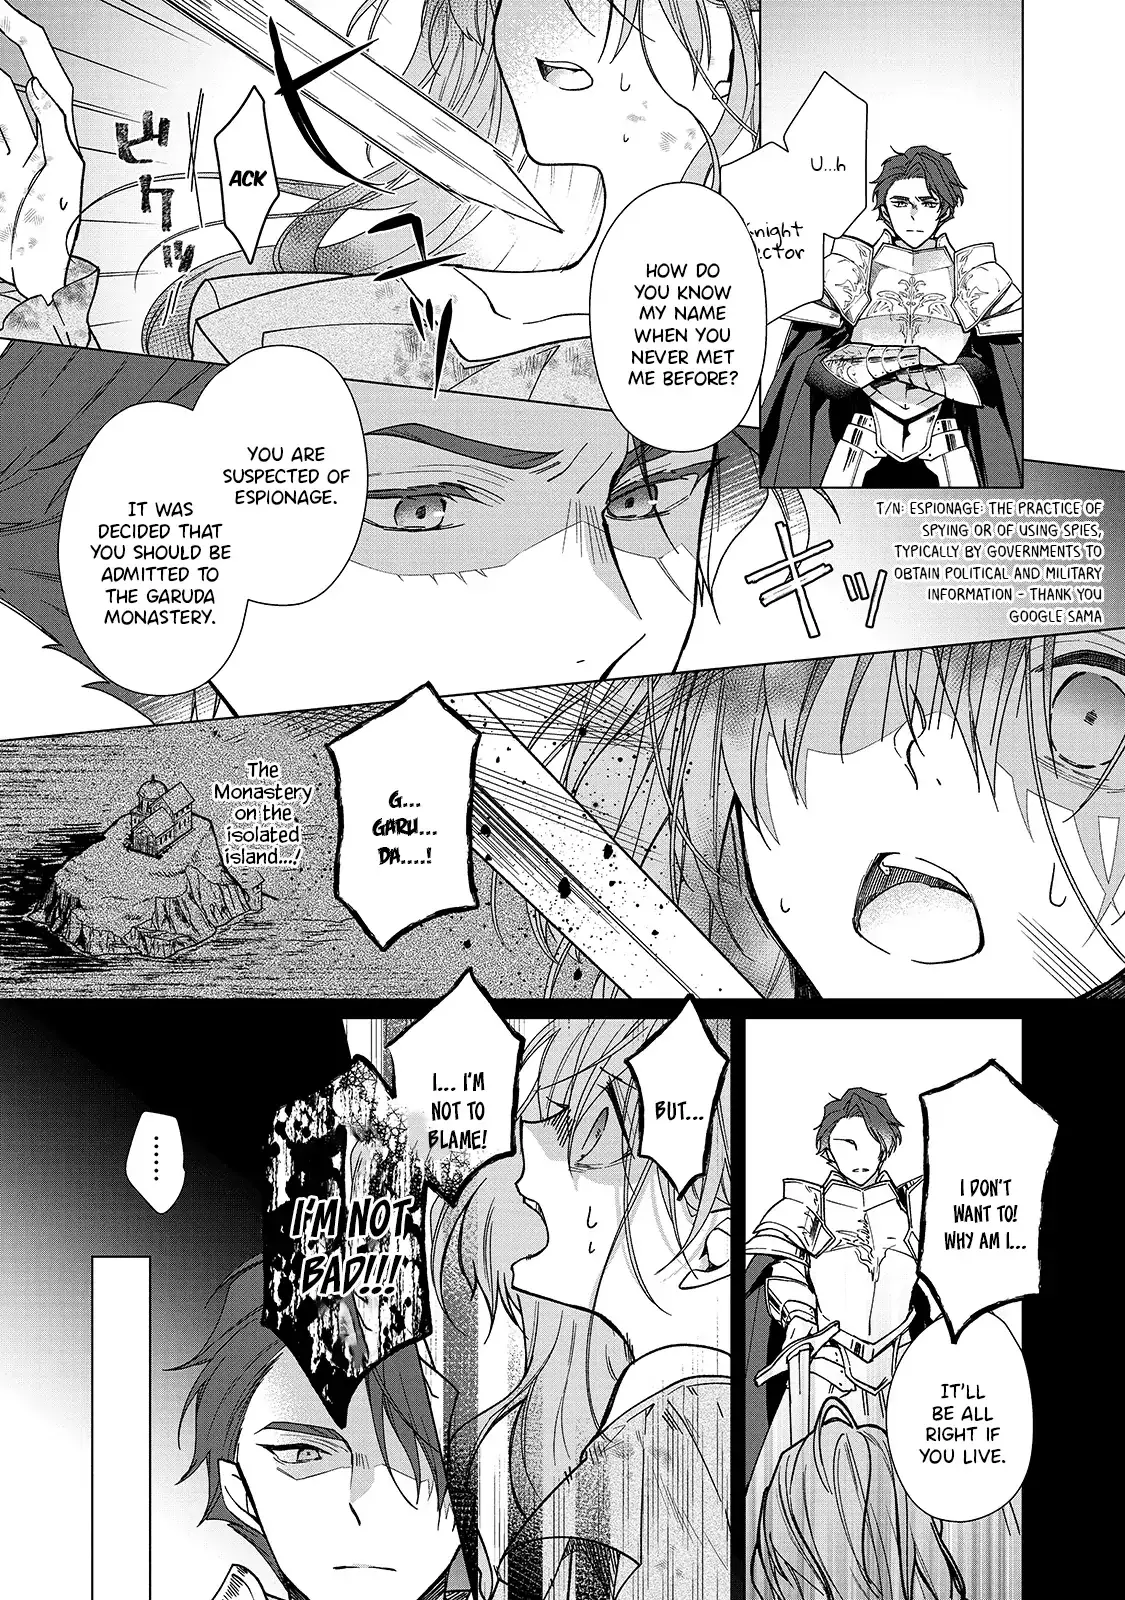 The Rubelia Kingdom’S Tale ~ I Ended Up Cleaning My Younger Cousin’S Mess ~ - 5 page 5-8562a728